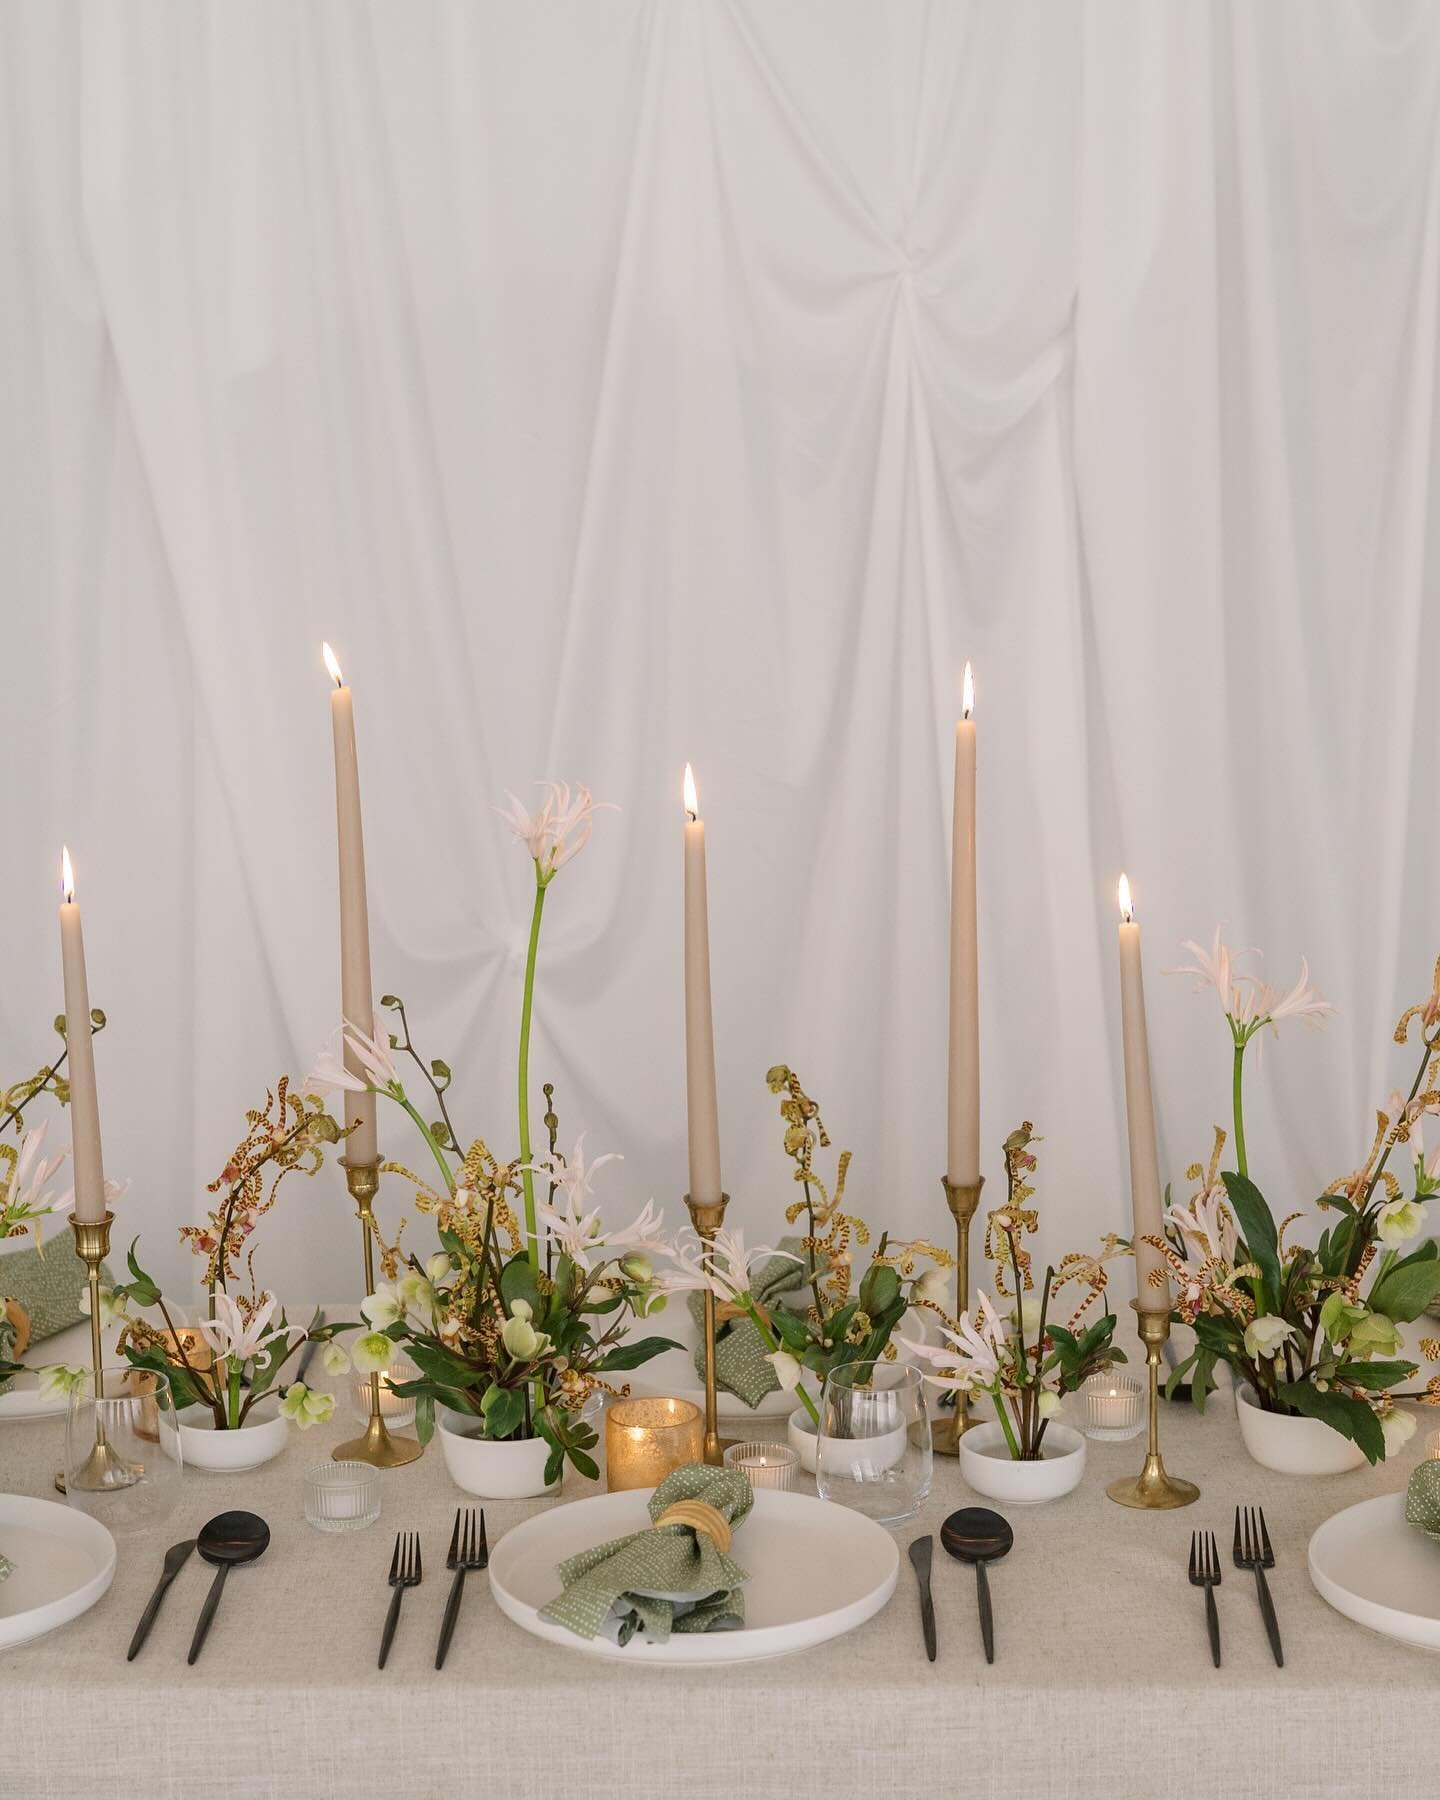 The beauty of focused ingredients and letting them shine. Love this unexpected combination with hellebore, nerines and orchids. 
.
.
.
Photographer: @alyssalizarragaphoto 
Design &amp; planning: @solstice_bloom 
Floral design: @solstice_bloom 
.
.
.
